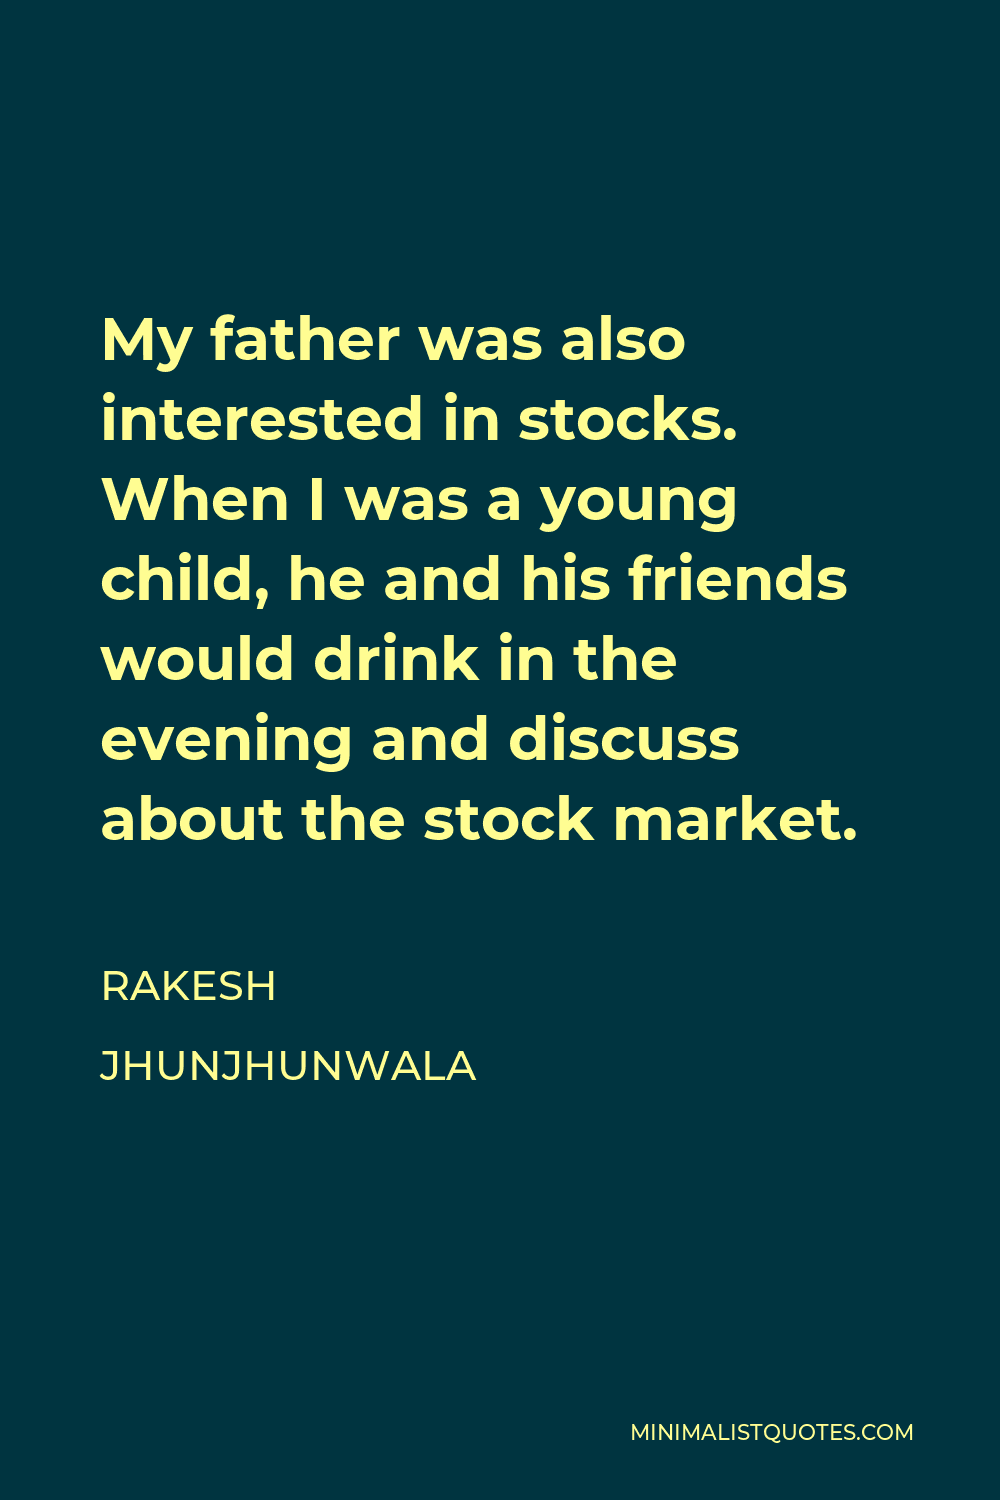 Rakesh Jhunjhunwala Quote - My father was also interested in stocks. When I was a young child, he and his friends would drink in the evening and discuss about the stock market.